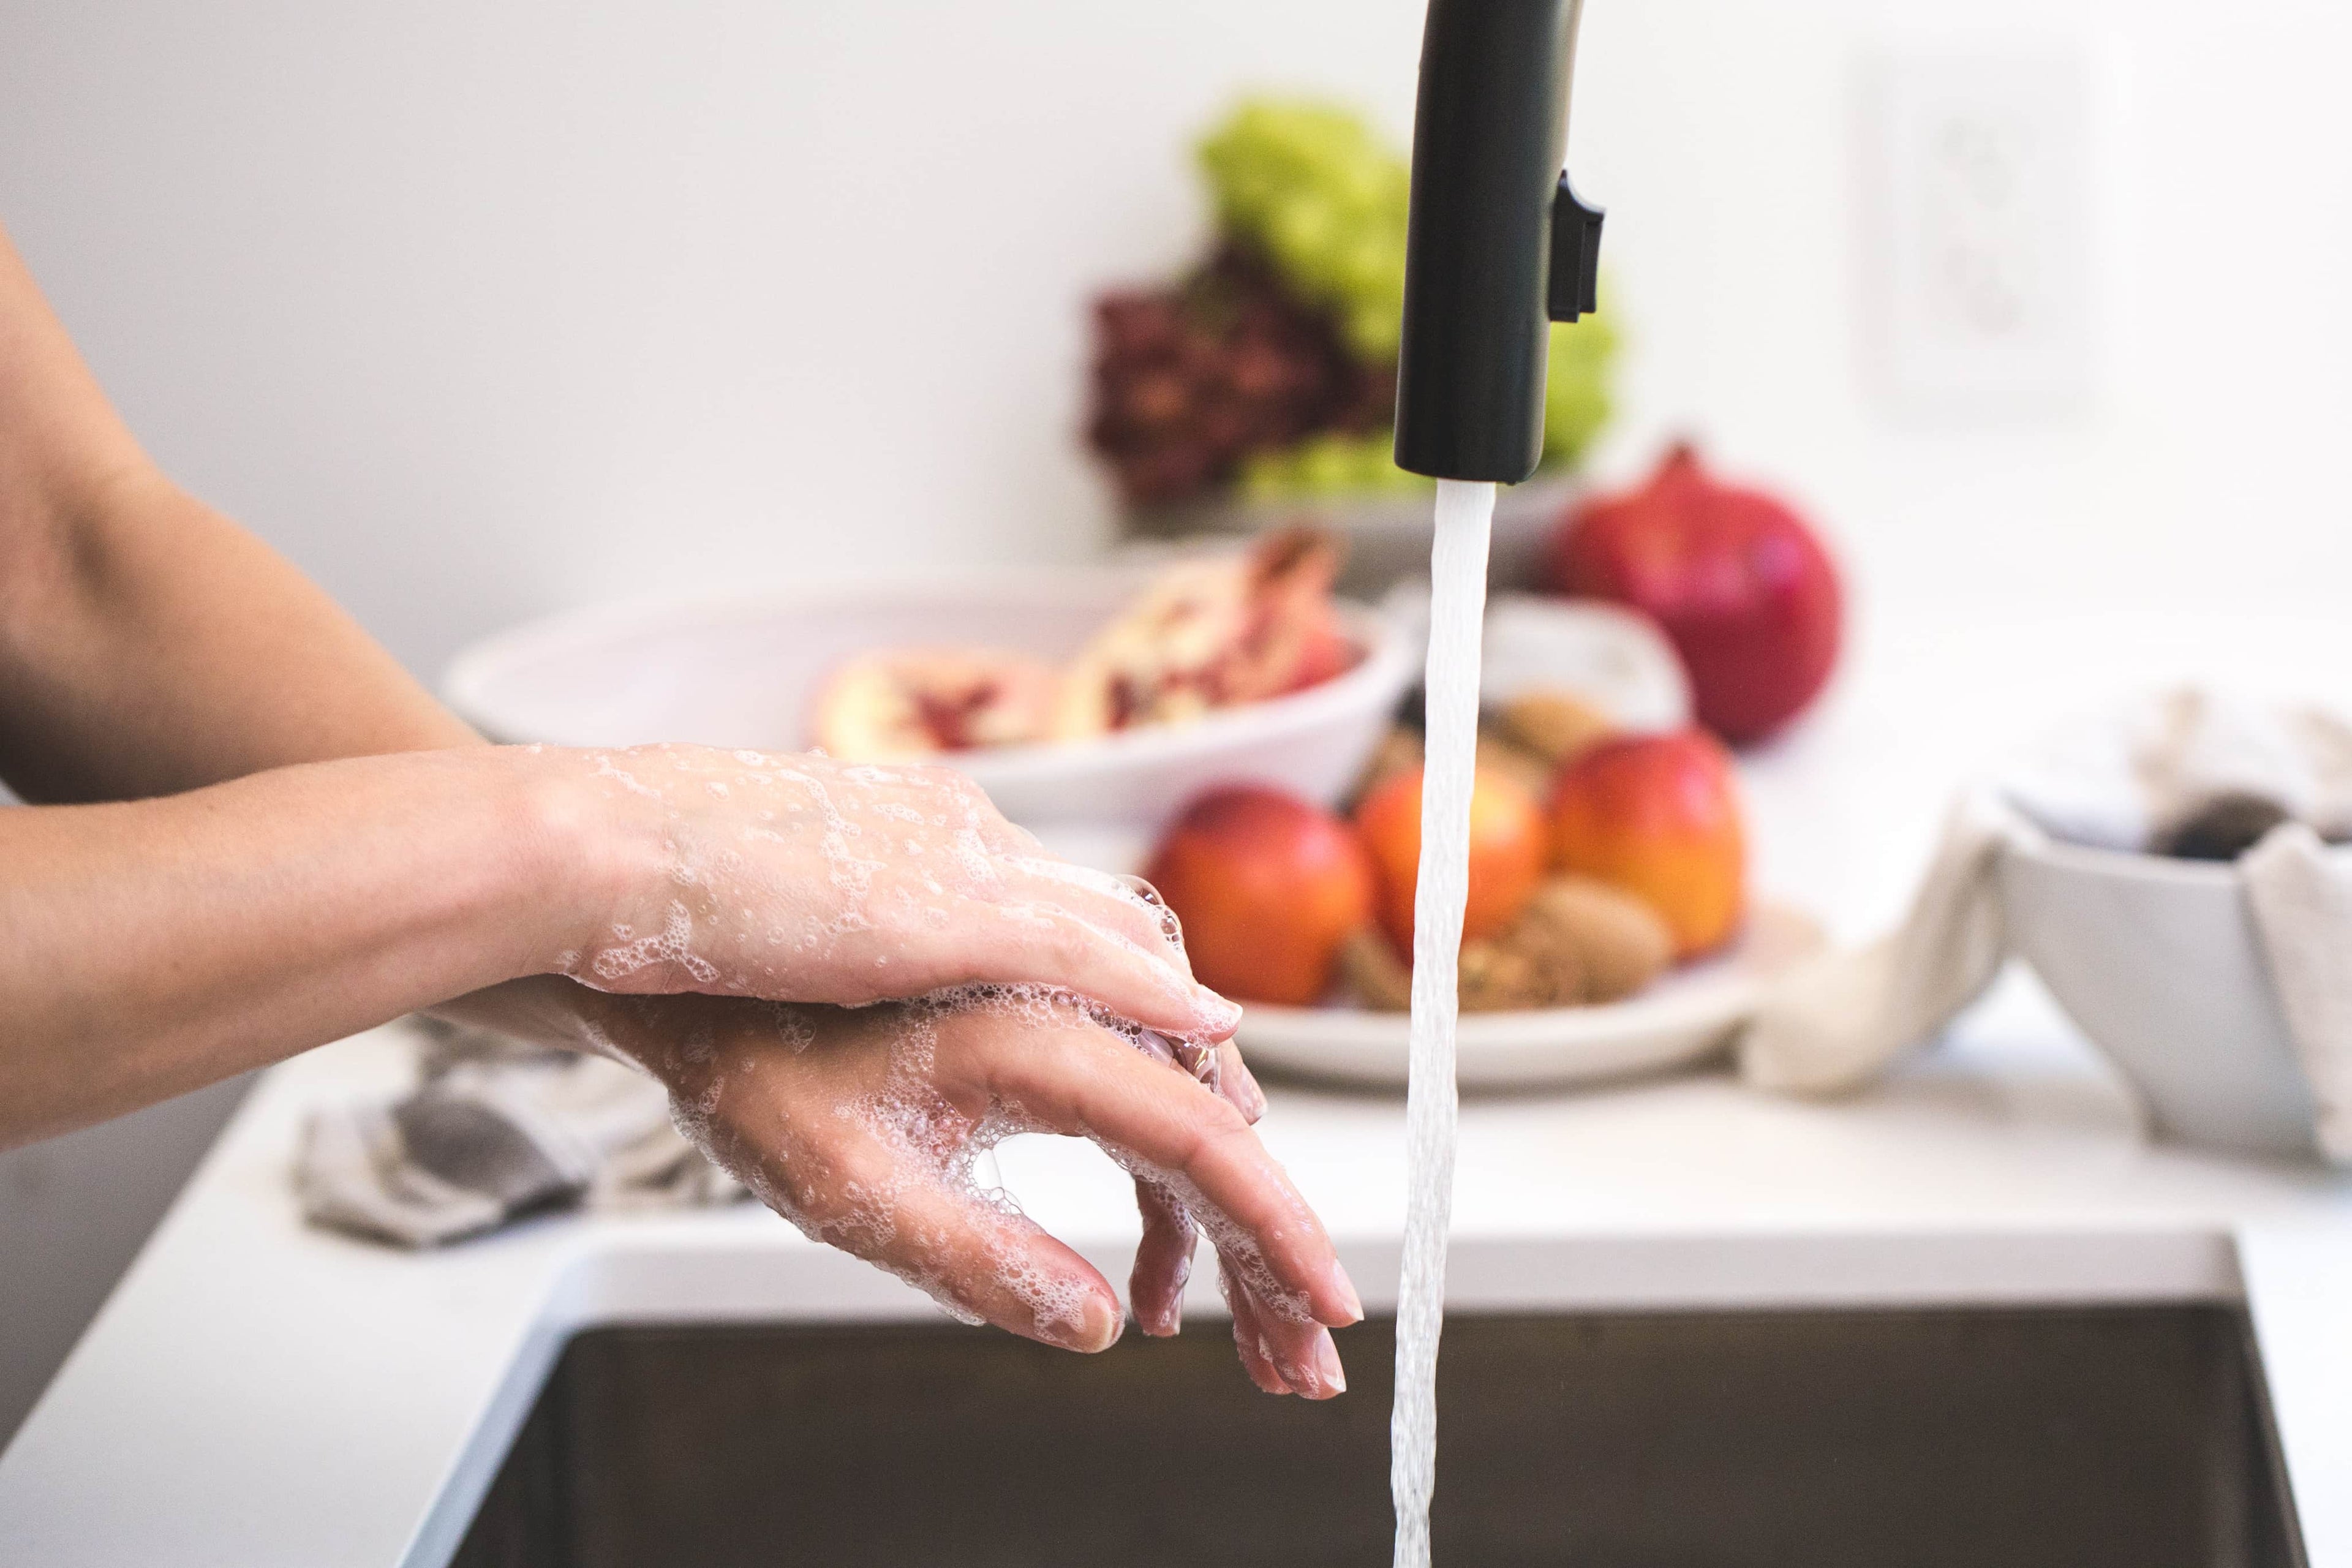 Woman washing her hands in the kitchen sink